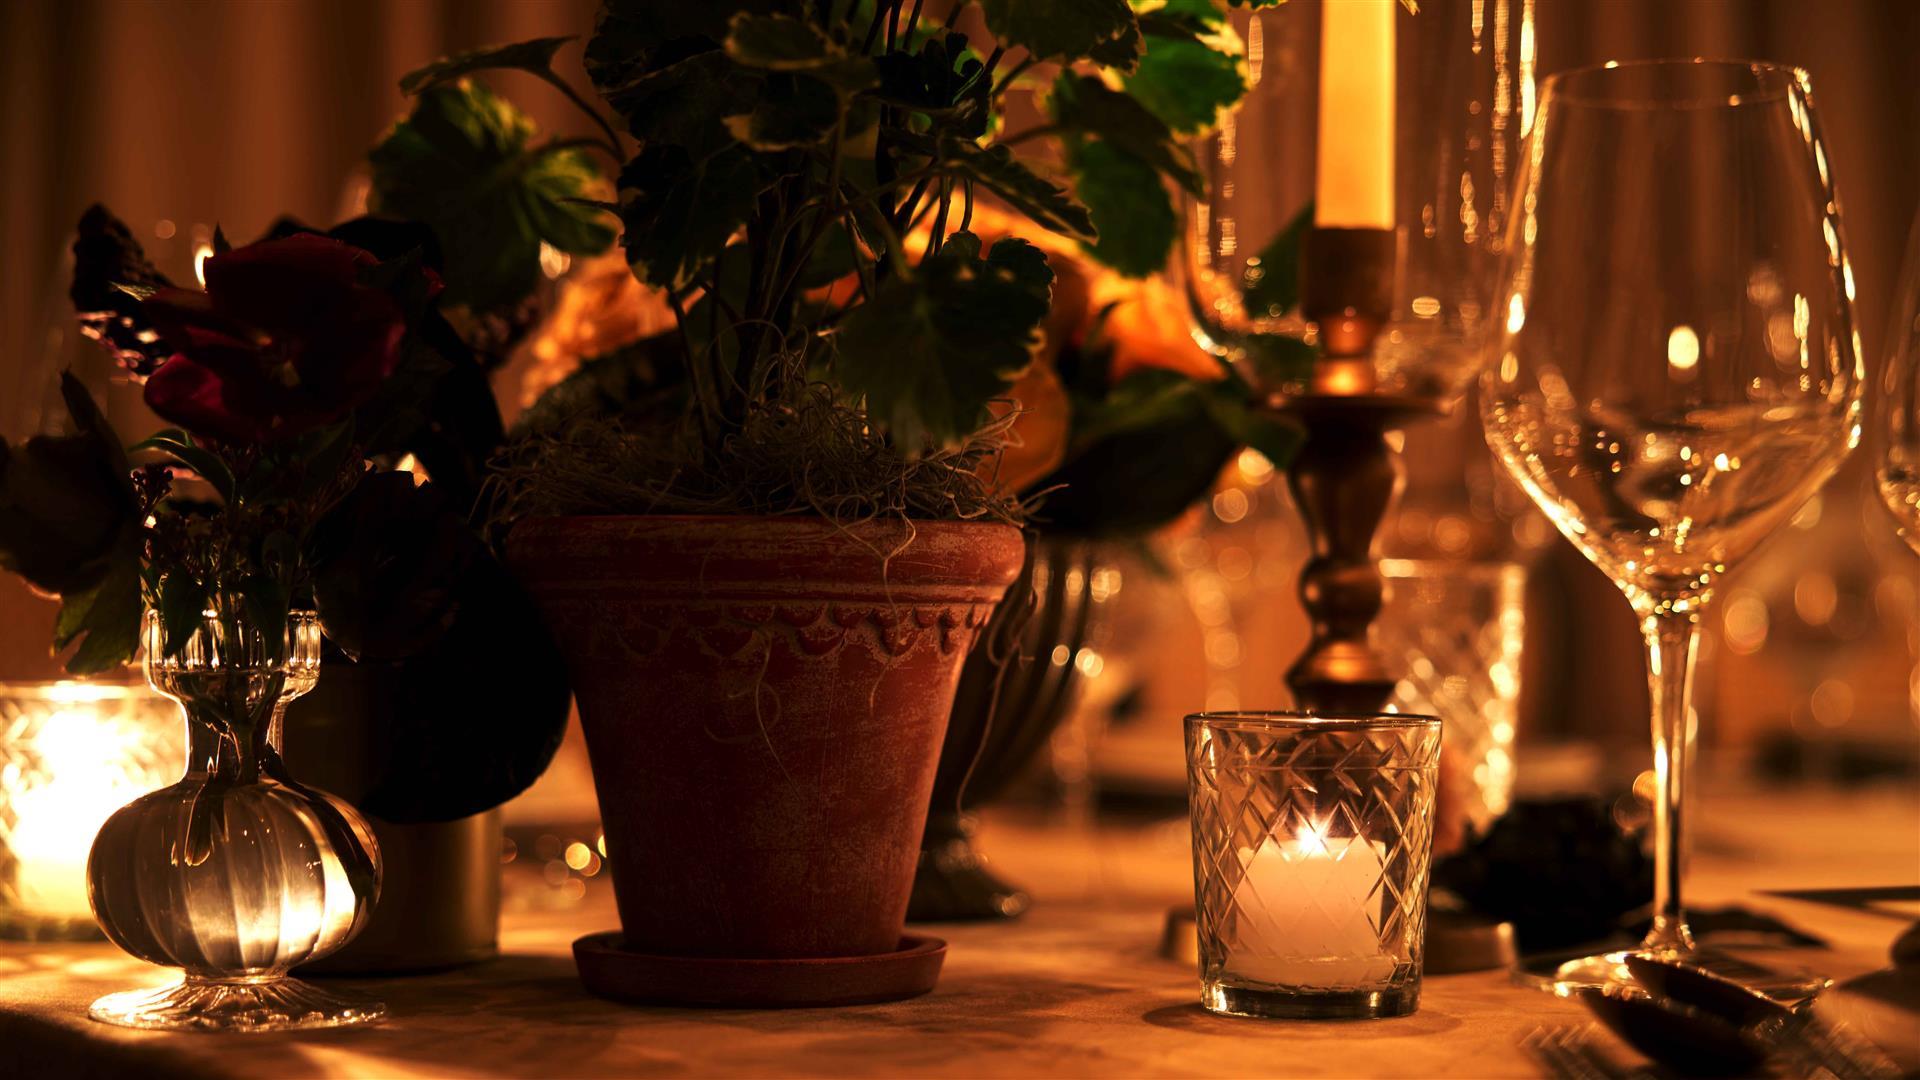 A Pot of Flowers alongside some Candles on a Table